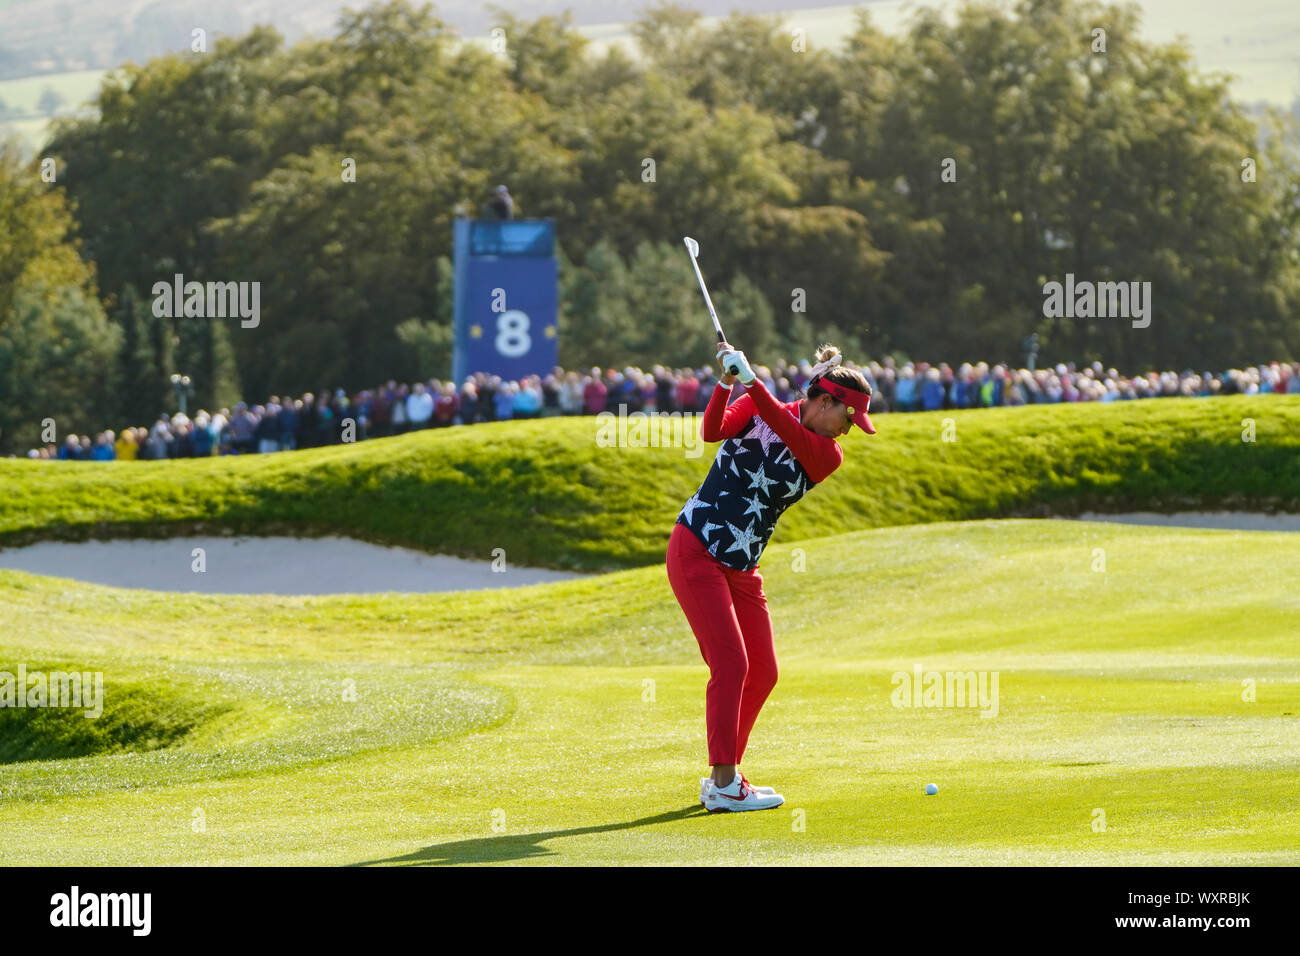 Solheim Cup 2019 at Centenary Course at Gleneagles in Scotland, UK. Annie Park of USA plays approach shot to the 8th hole during the Friday Morning Foursomes. Stock Photo